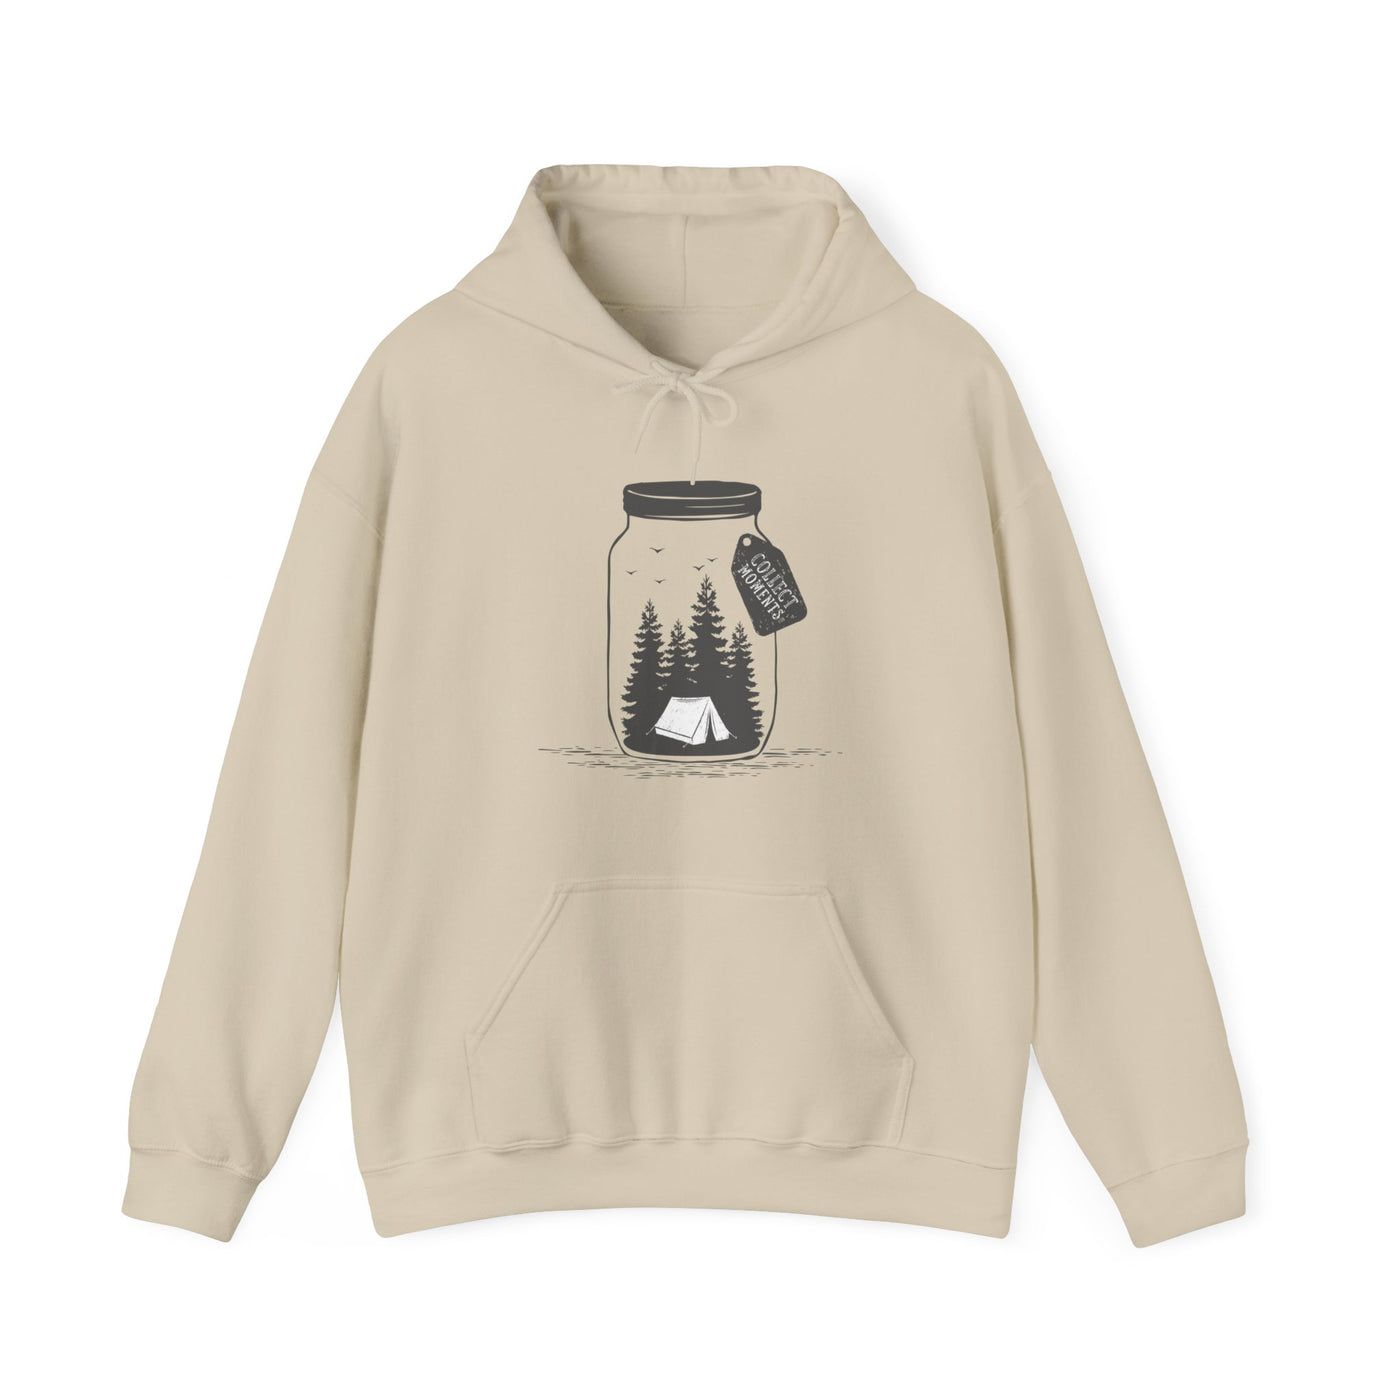 Collect Moments Not Things Hooded Sweatshirt